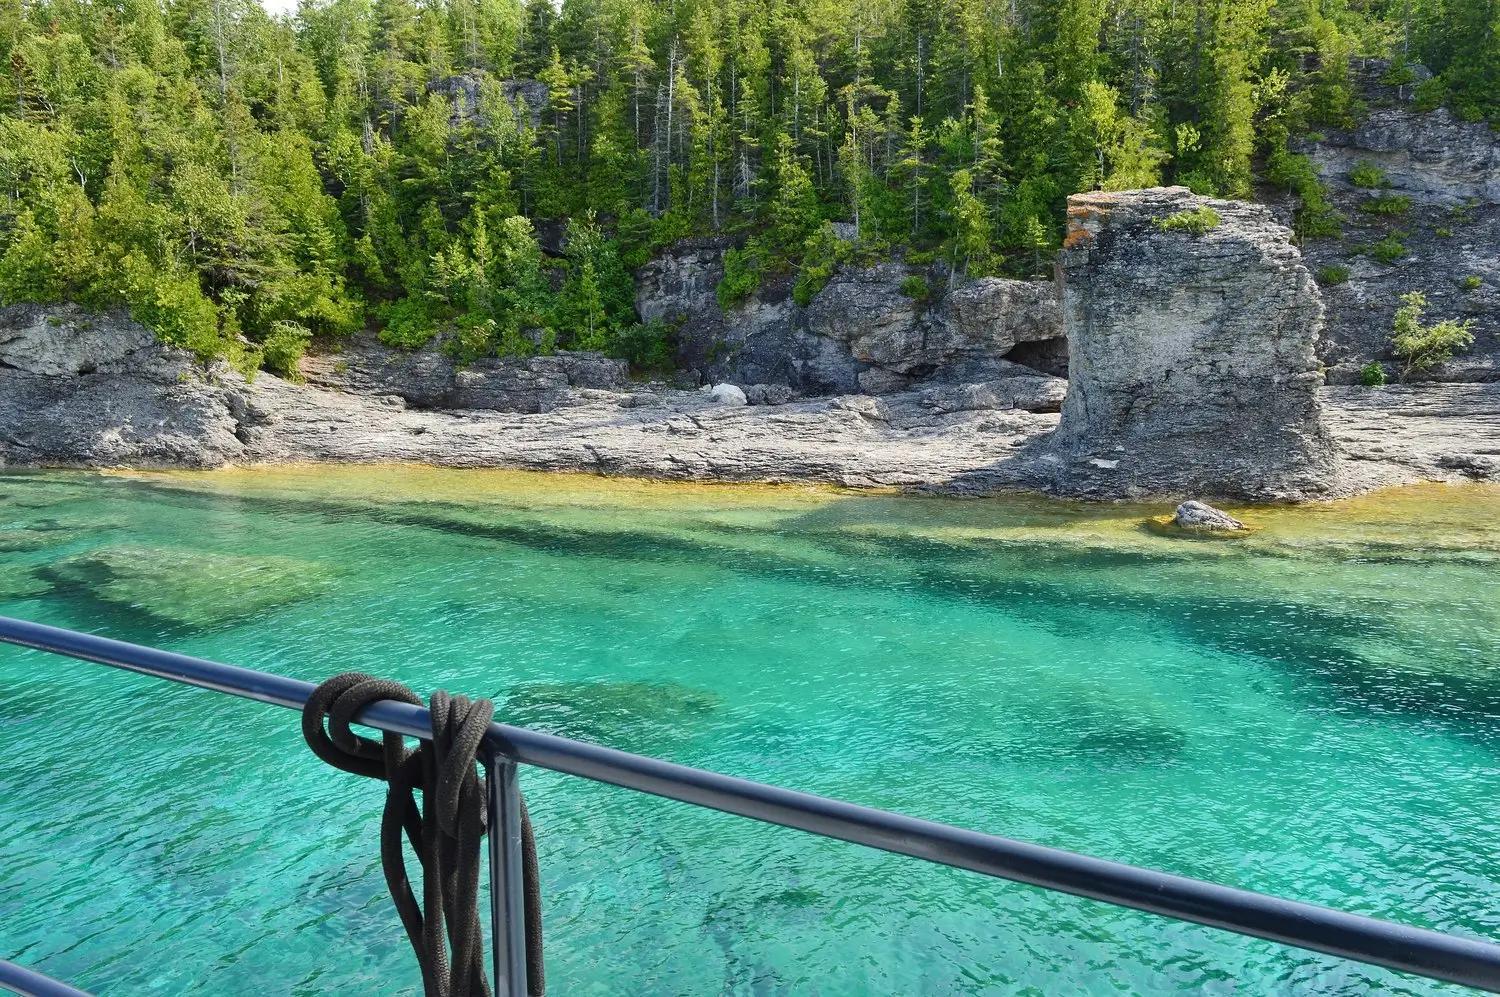 A rocky shoreline featuring a rock formation known as a Flowerpot, coniferous trees, and crystal-clear blue water.